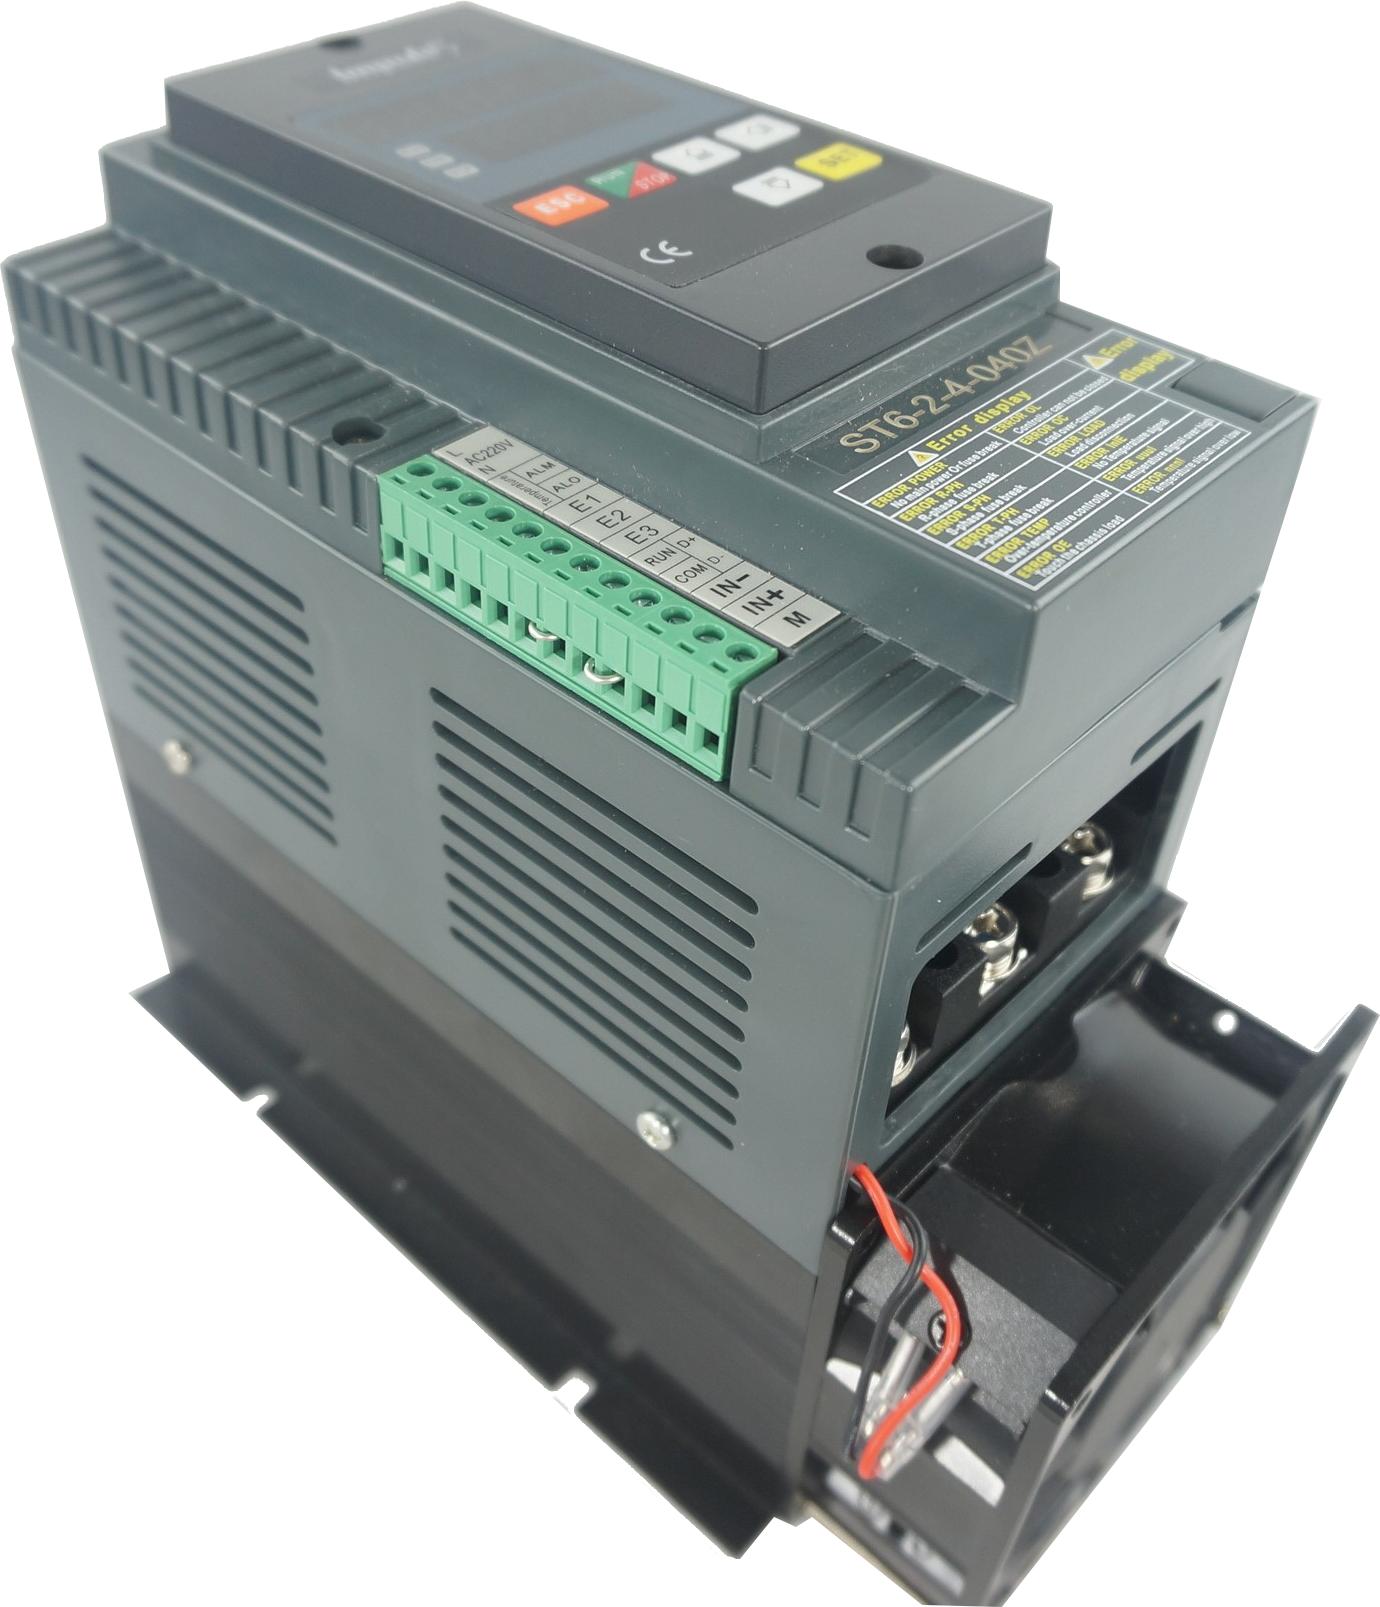 T6 Series Low Cost 3 Phase, 2 Leg SCR Burst Controller, 400VAC with In built Fuses, 32-60 Amps per Phase @ 50 Deg C